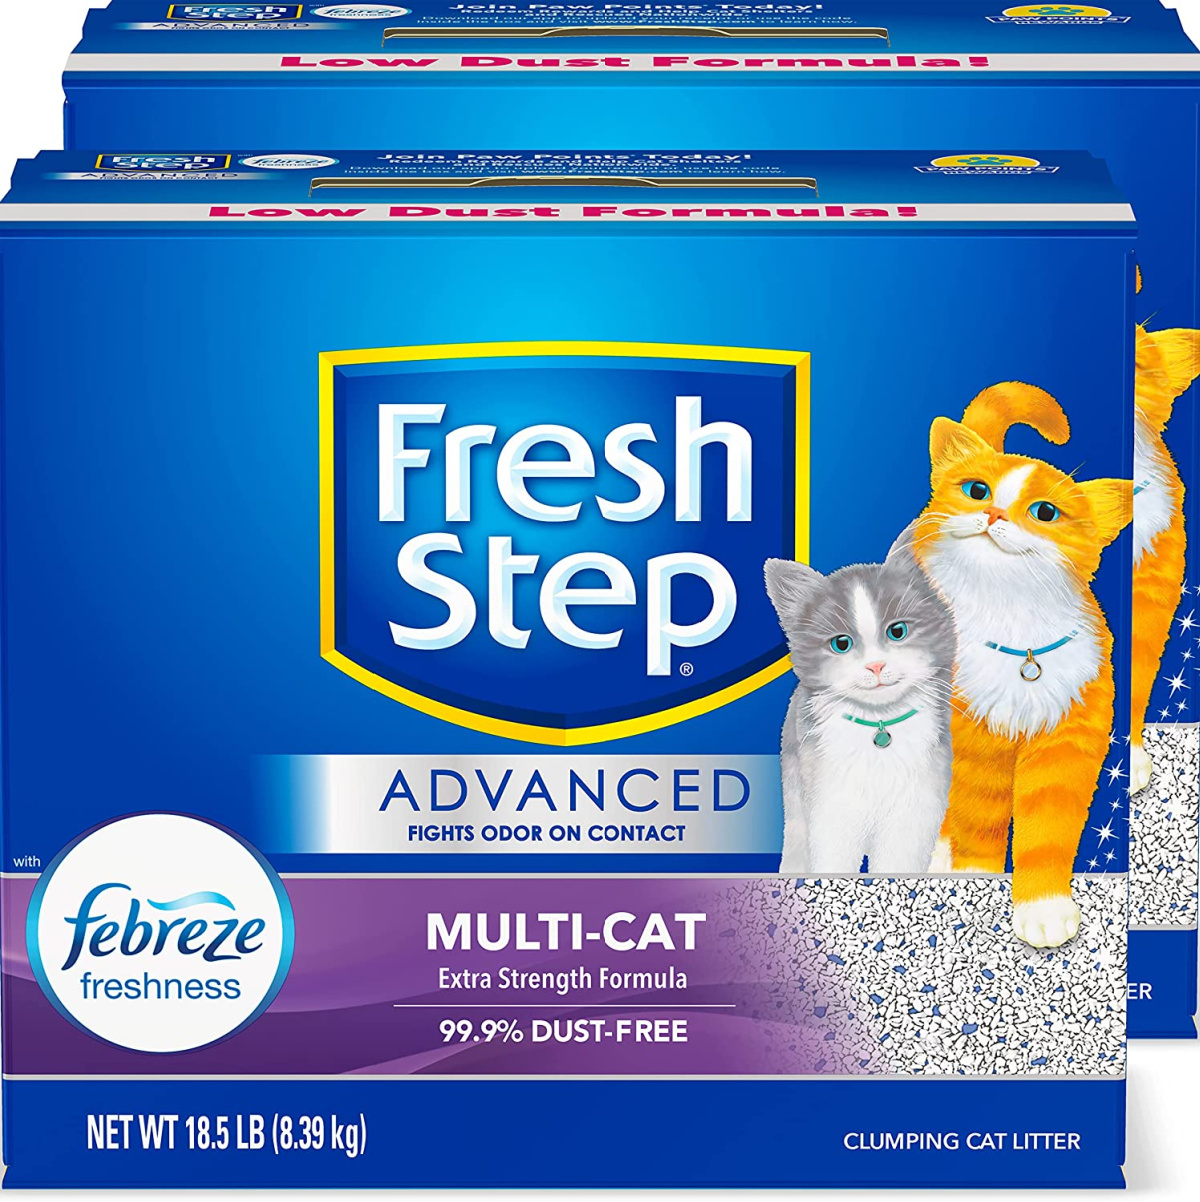 stock image of two boxes of fresh step cat litter